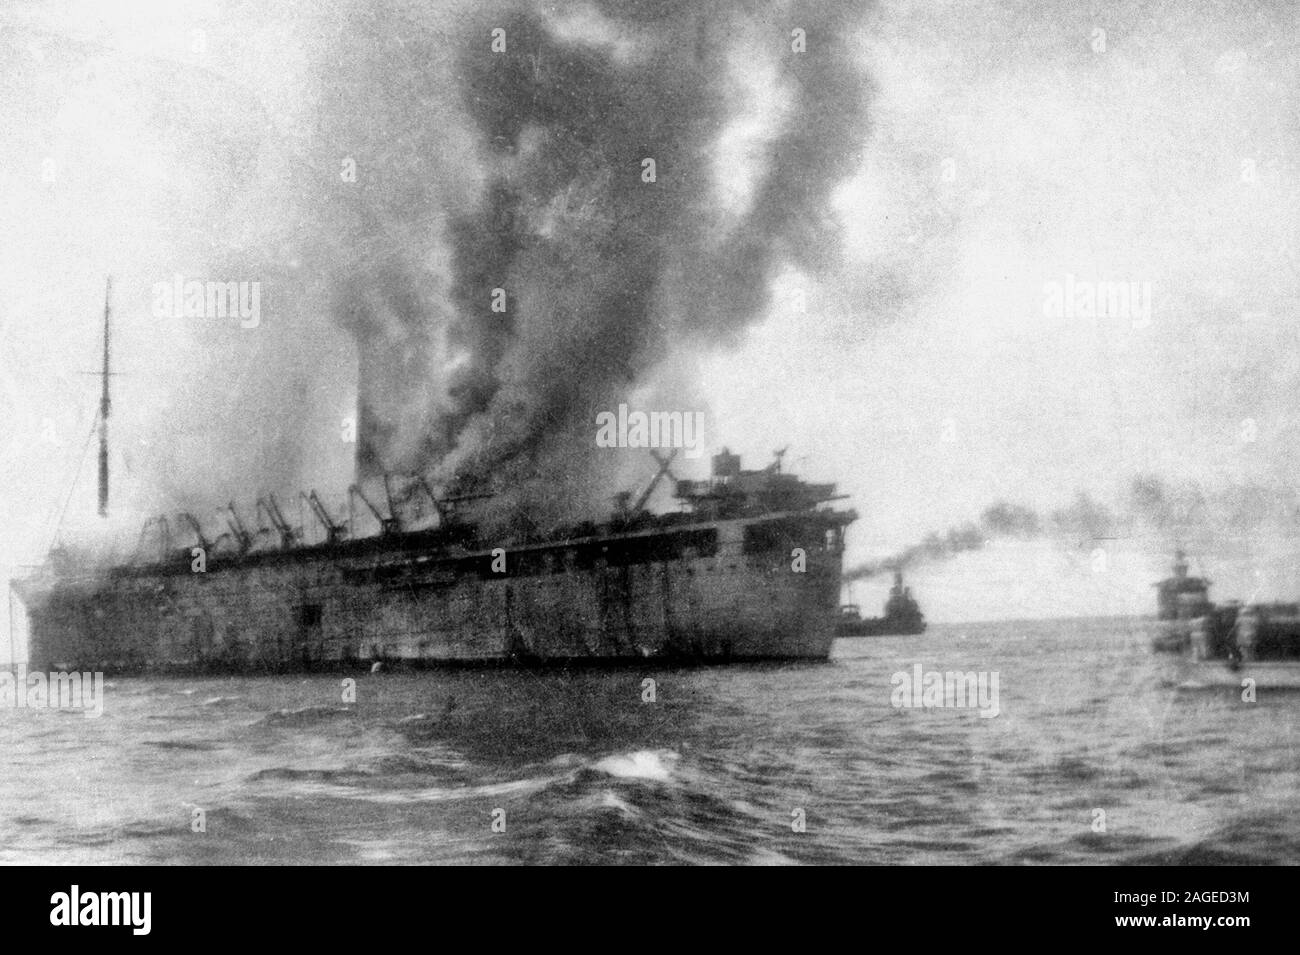 Starboard side view of the extensively damaged British transport the Empress of Asia and Navy rescue vessels. The transport was set on fire during a bomb attack by Japanese aircraft. It was one of four ships bringing the remainder of the 18th British Division, some other troops, and transport vehicles to the island. Most of the troops were rescued by the Navy, but nearly all their weapons and equipment were lost. Singapore, February 1942 Stock Photo